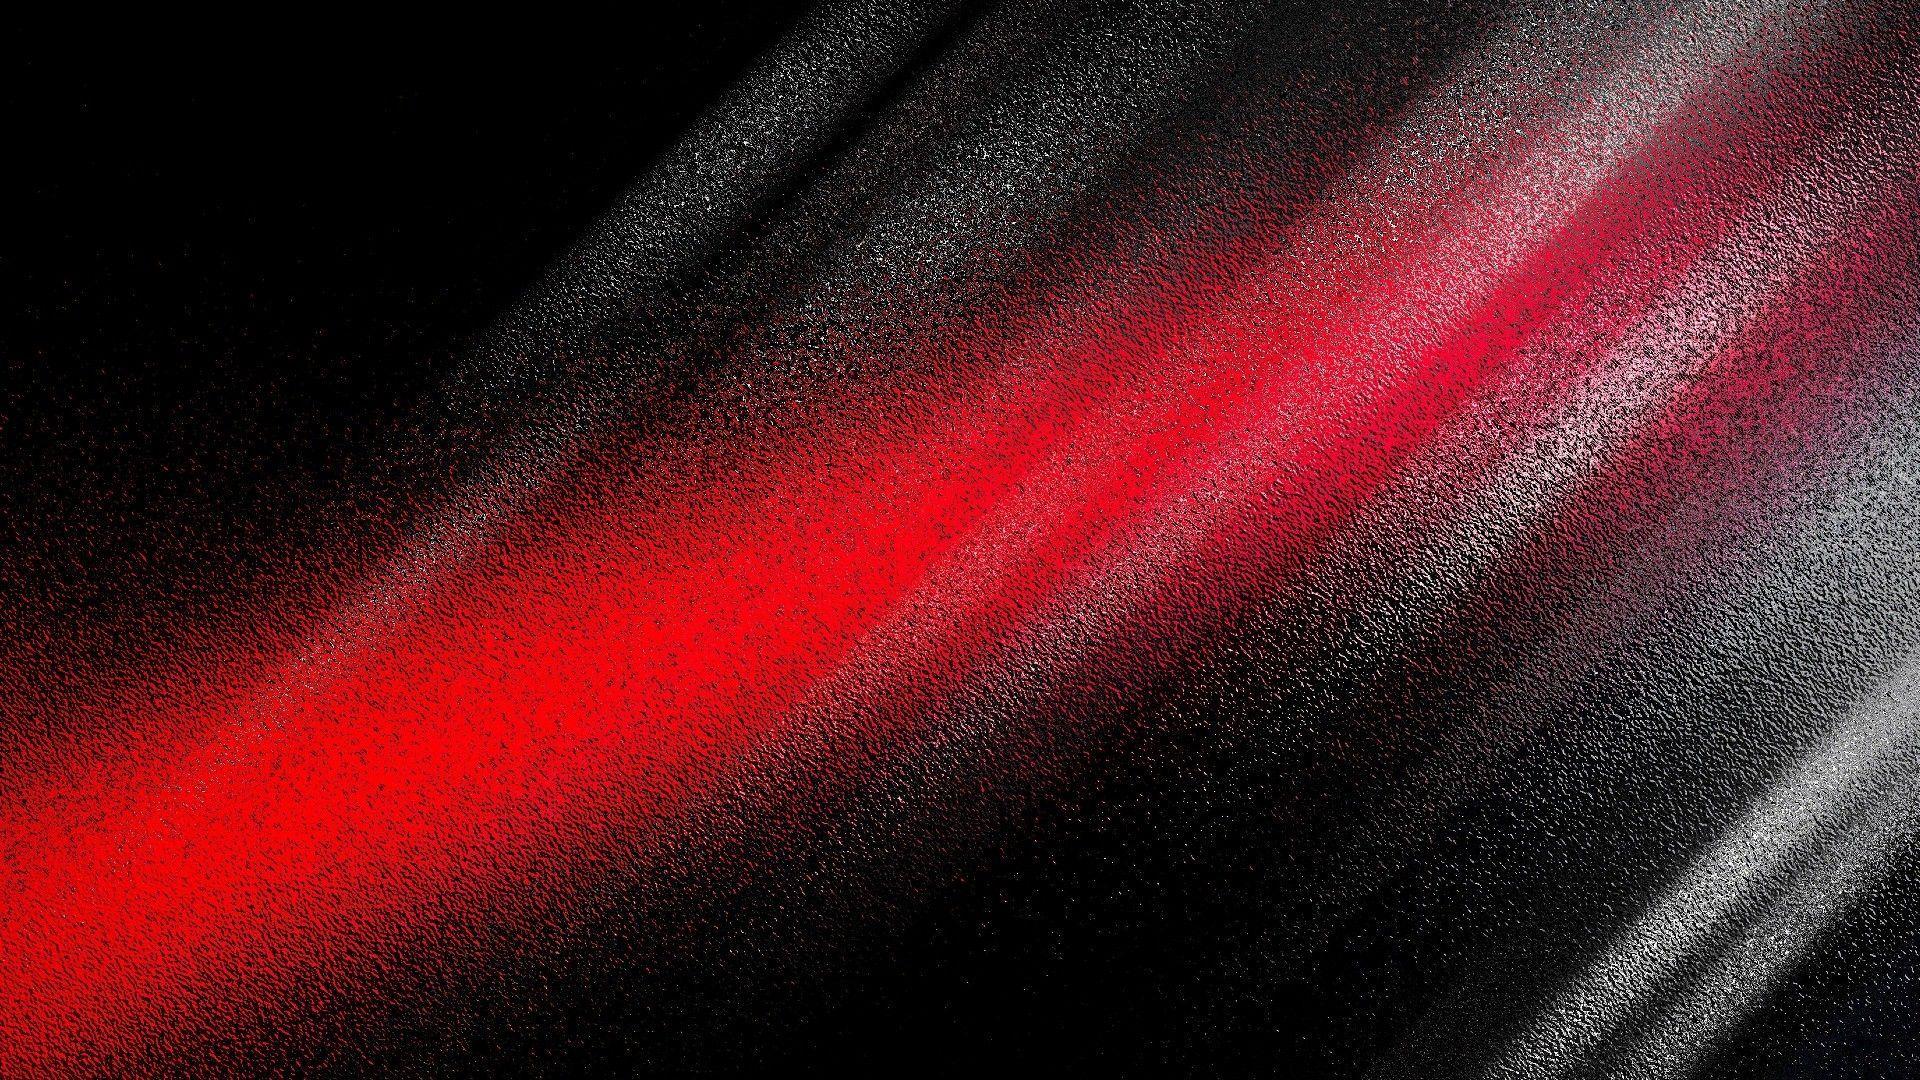 Black and Red Abstract HD Desktop Wallpaper 64267 1920x1080px